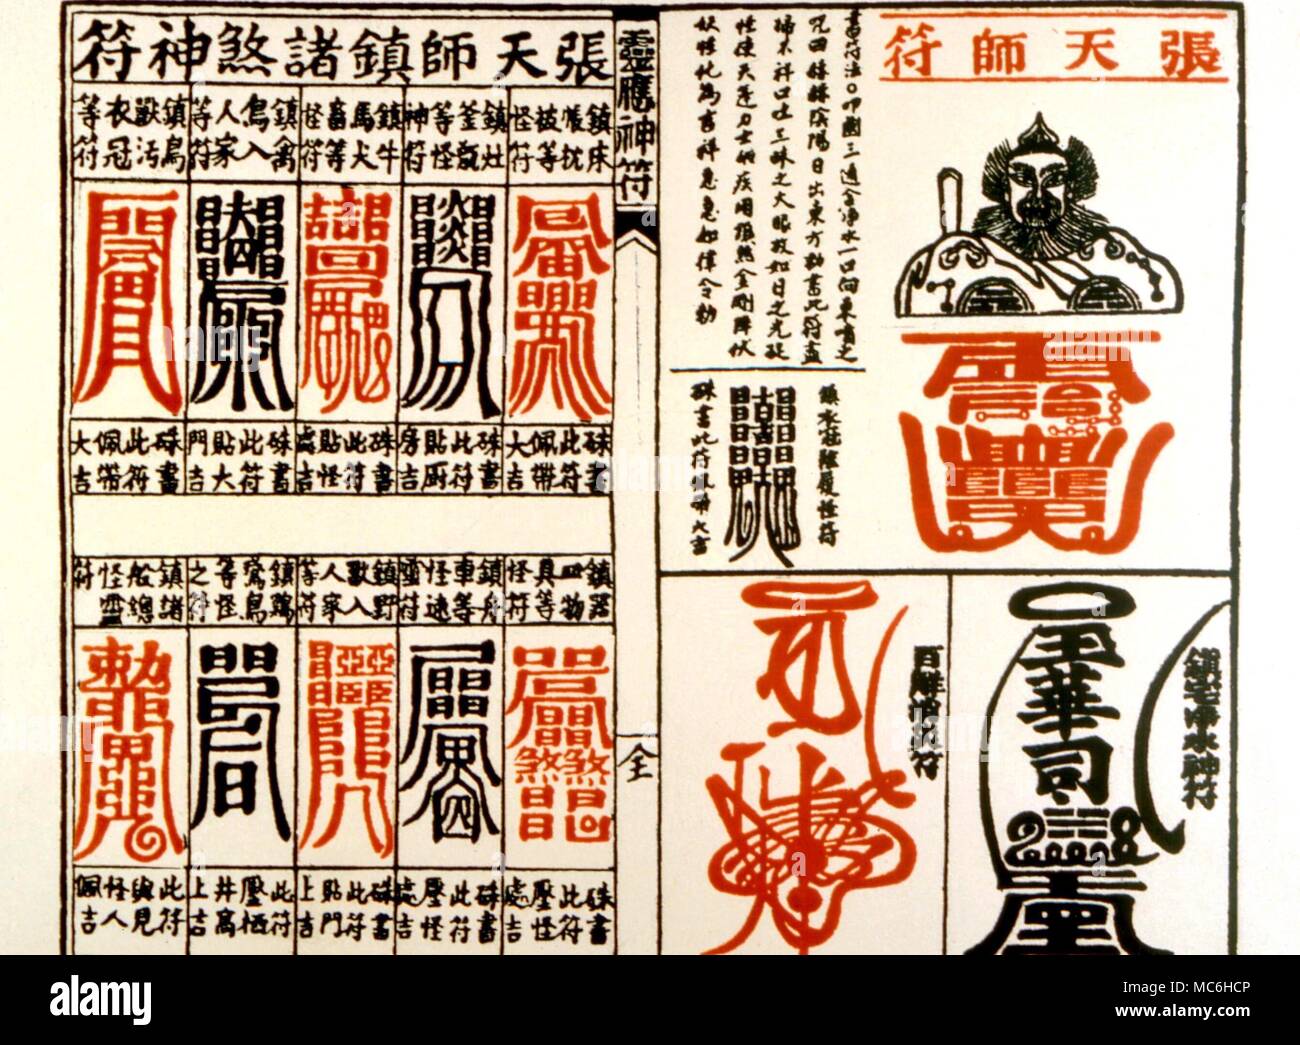 AMULETS - Chinese Charms. Portrait of Chang T'ien-shih, with character charms to rotect the home, wells and various other things. From the 'T'ung Shu' Chinese almanac Stock Photo